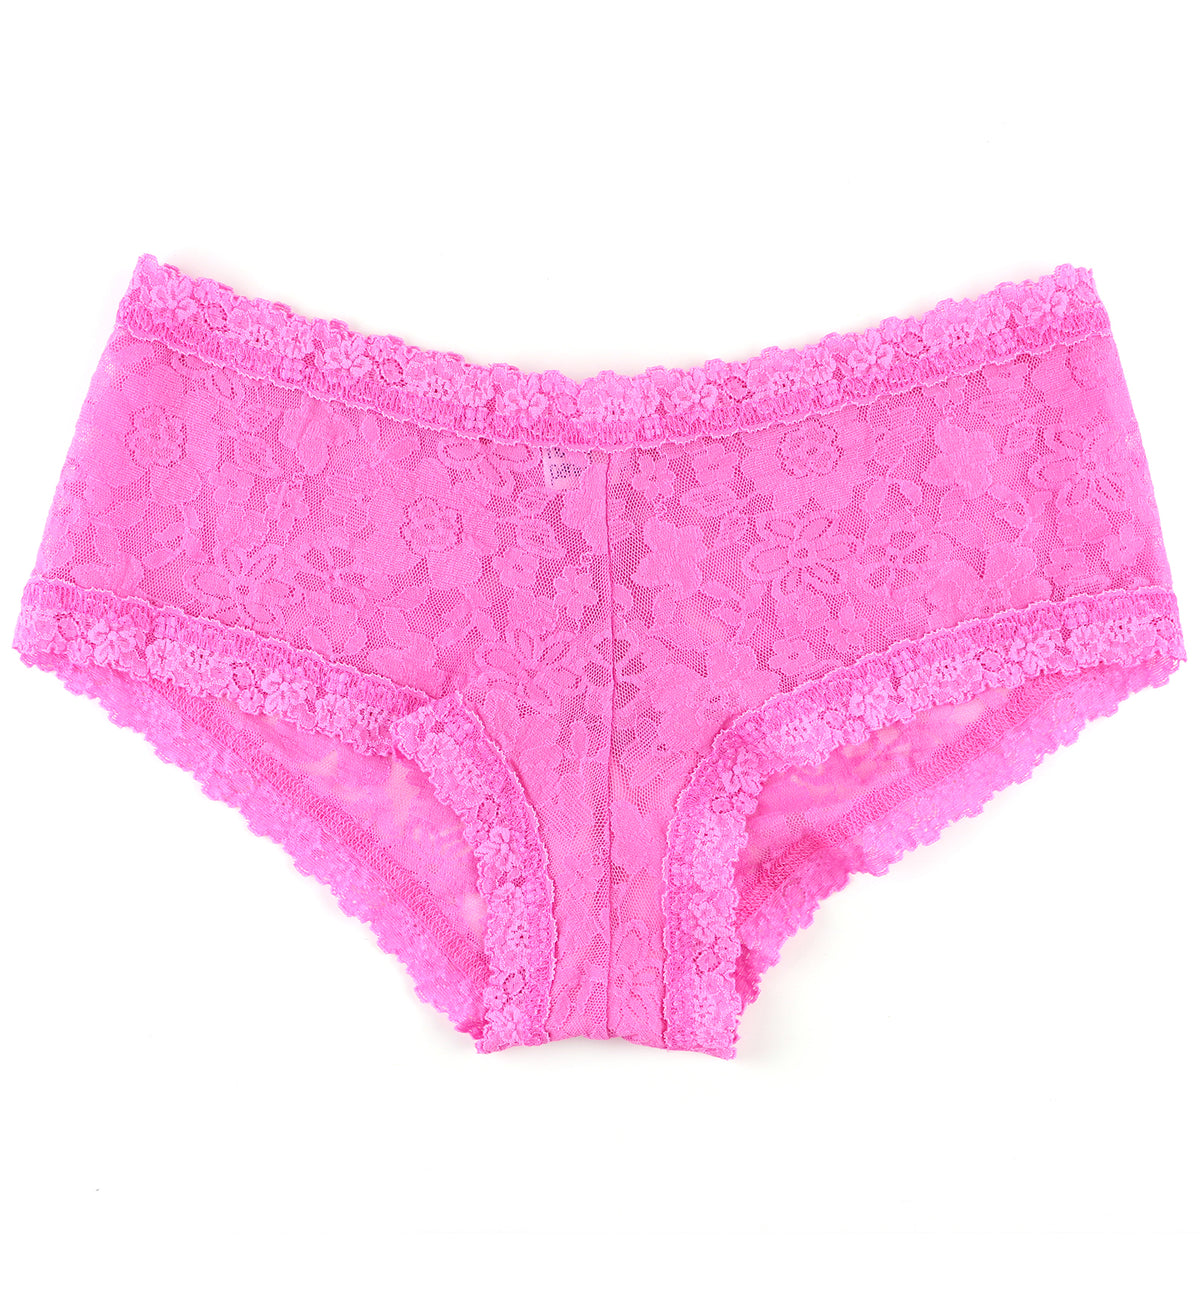 Hanky Panky Daily Lace Boyshort (771201P),XS,Dream House Pink - Dream House Pink,XS